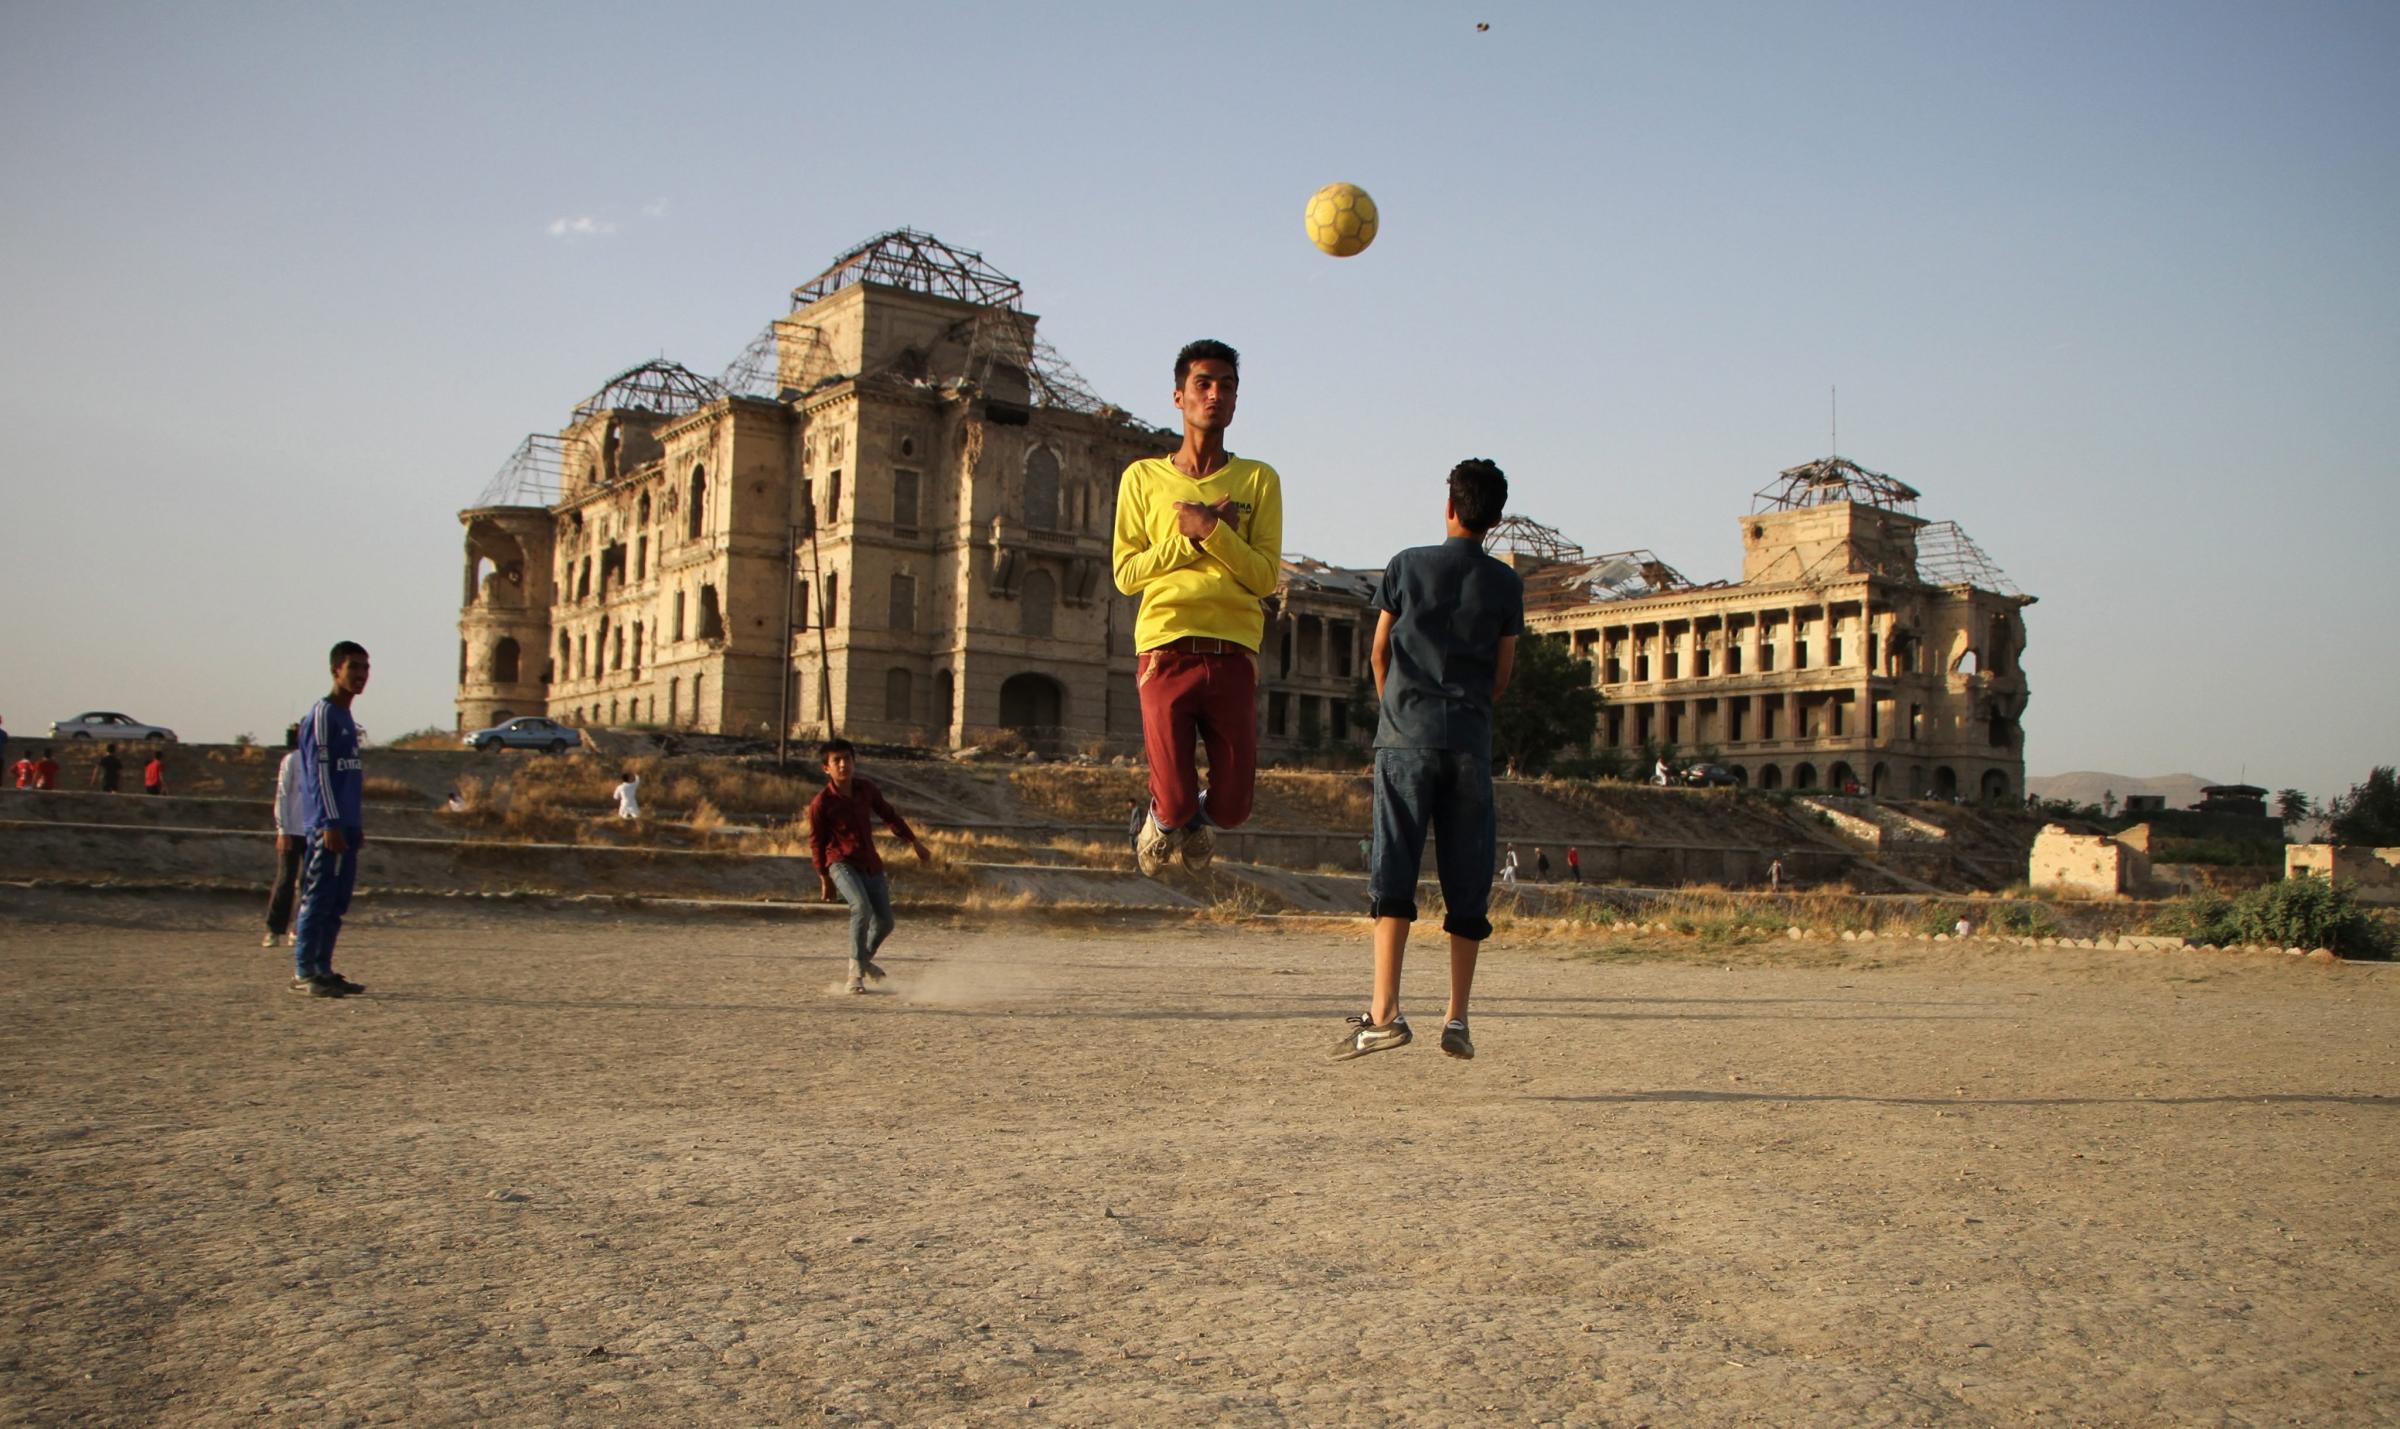 Afghans play soccer on the outskirts of Kabul